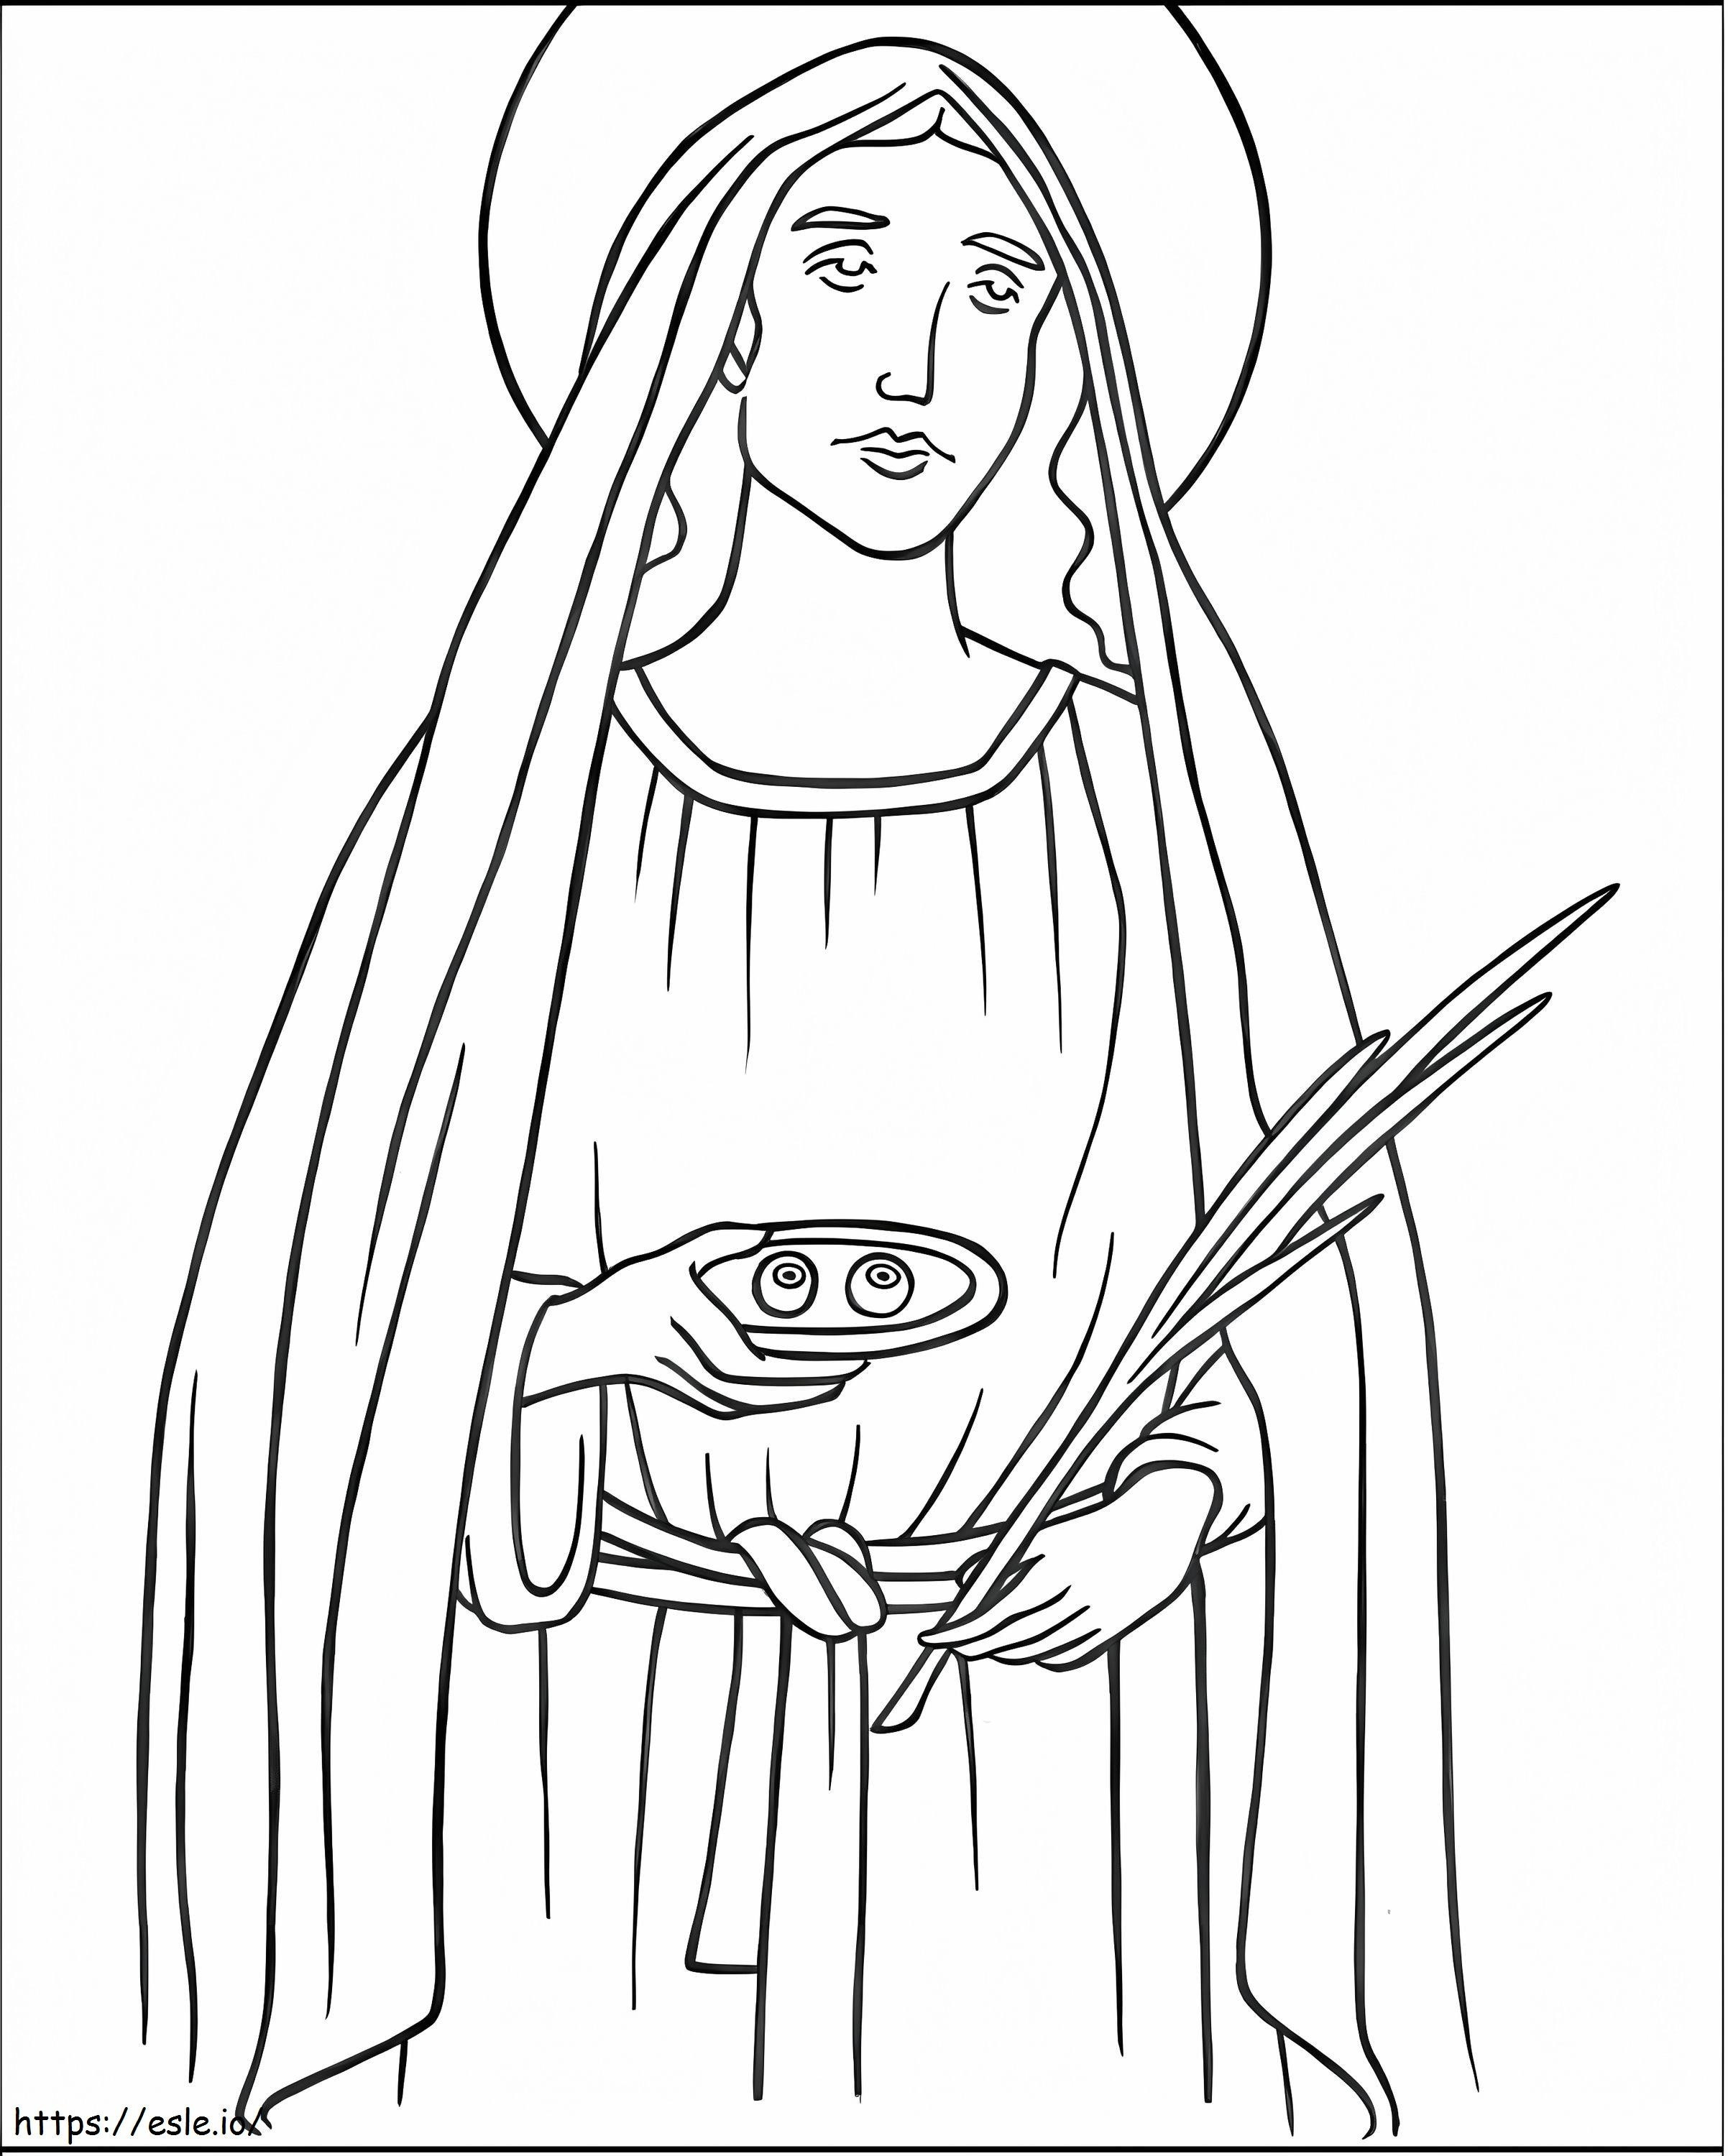 Saint Lucy 3 coloring page